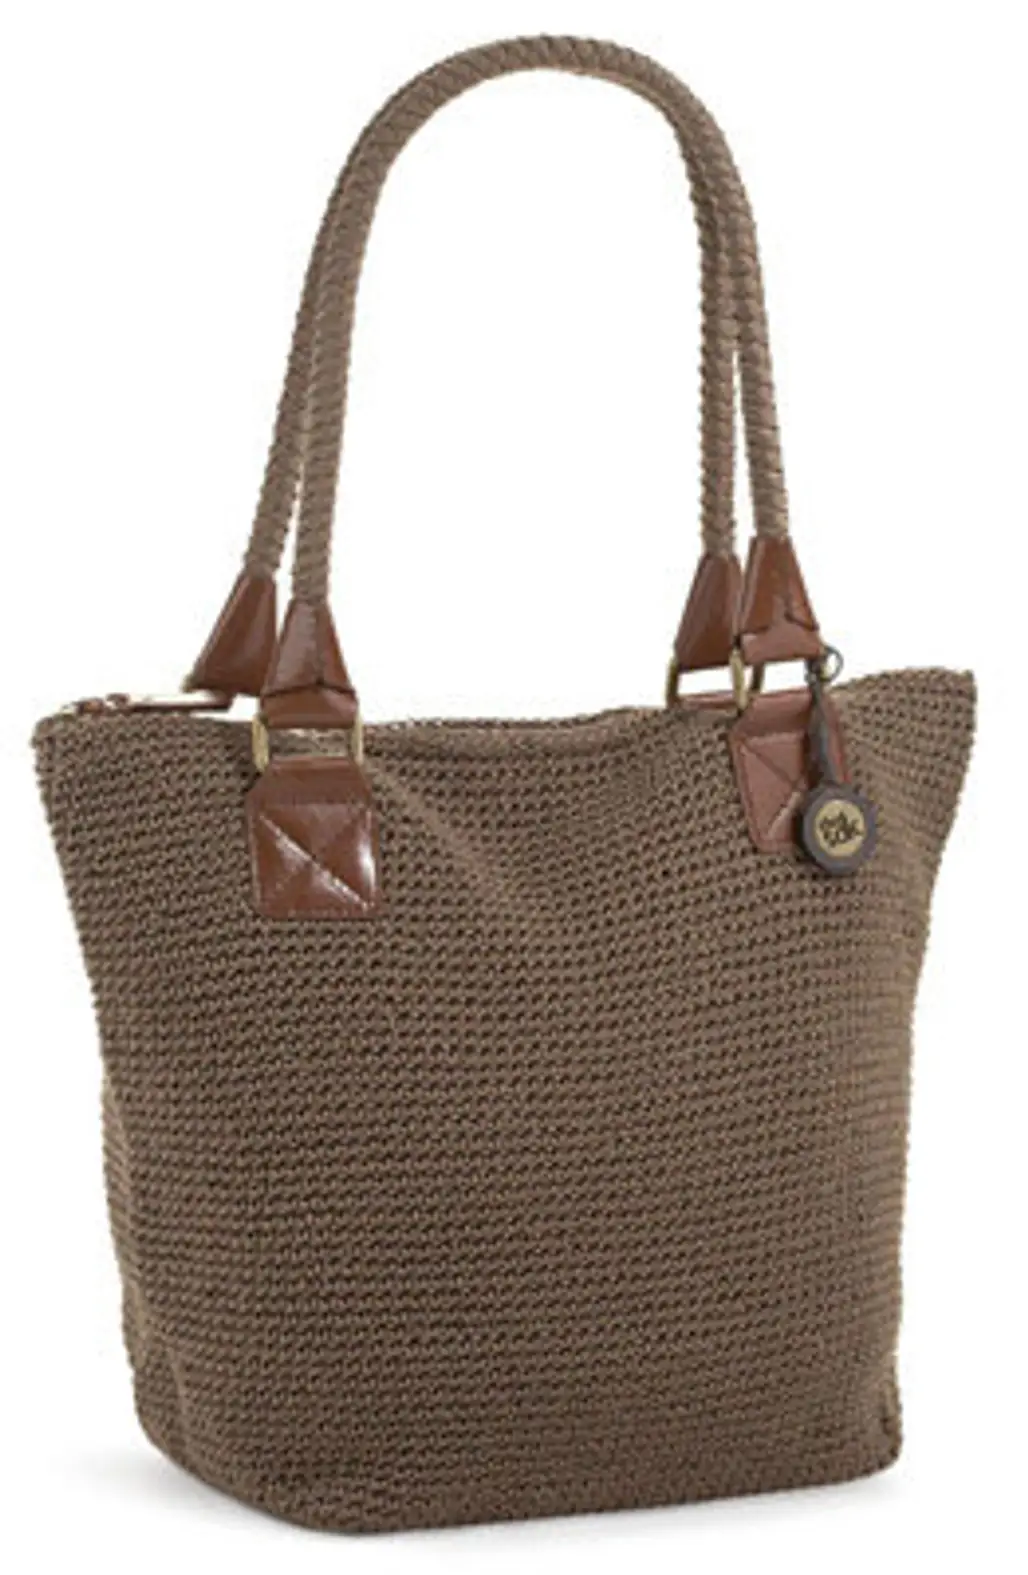 The Sak “Cambia” Large Tote from Dillards